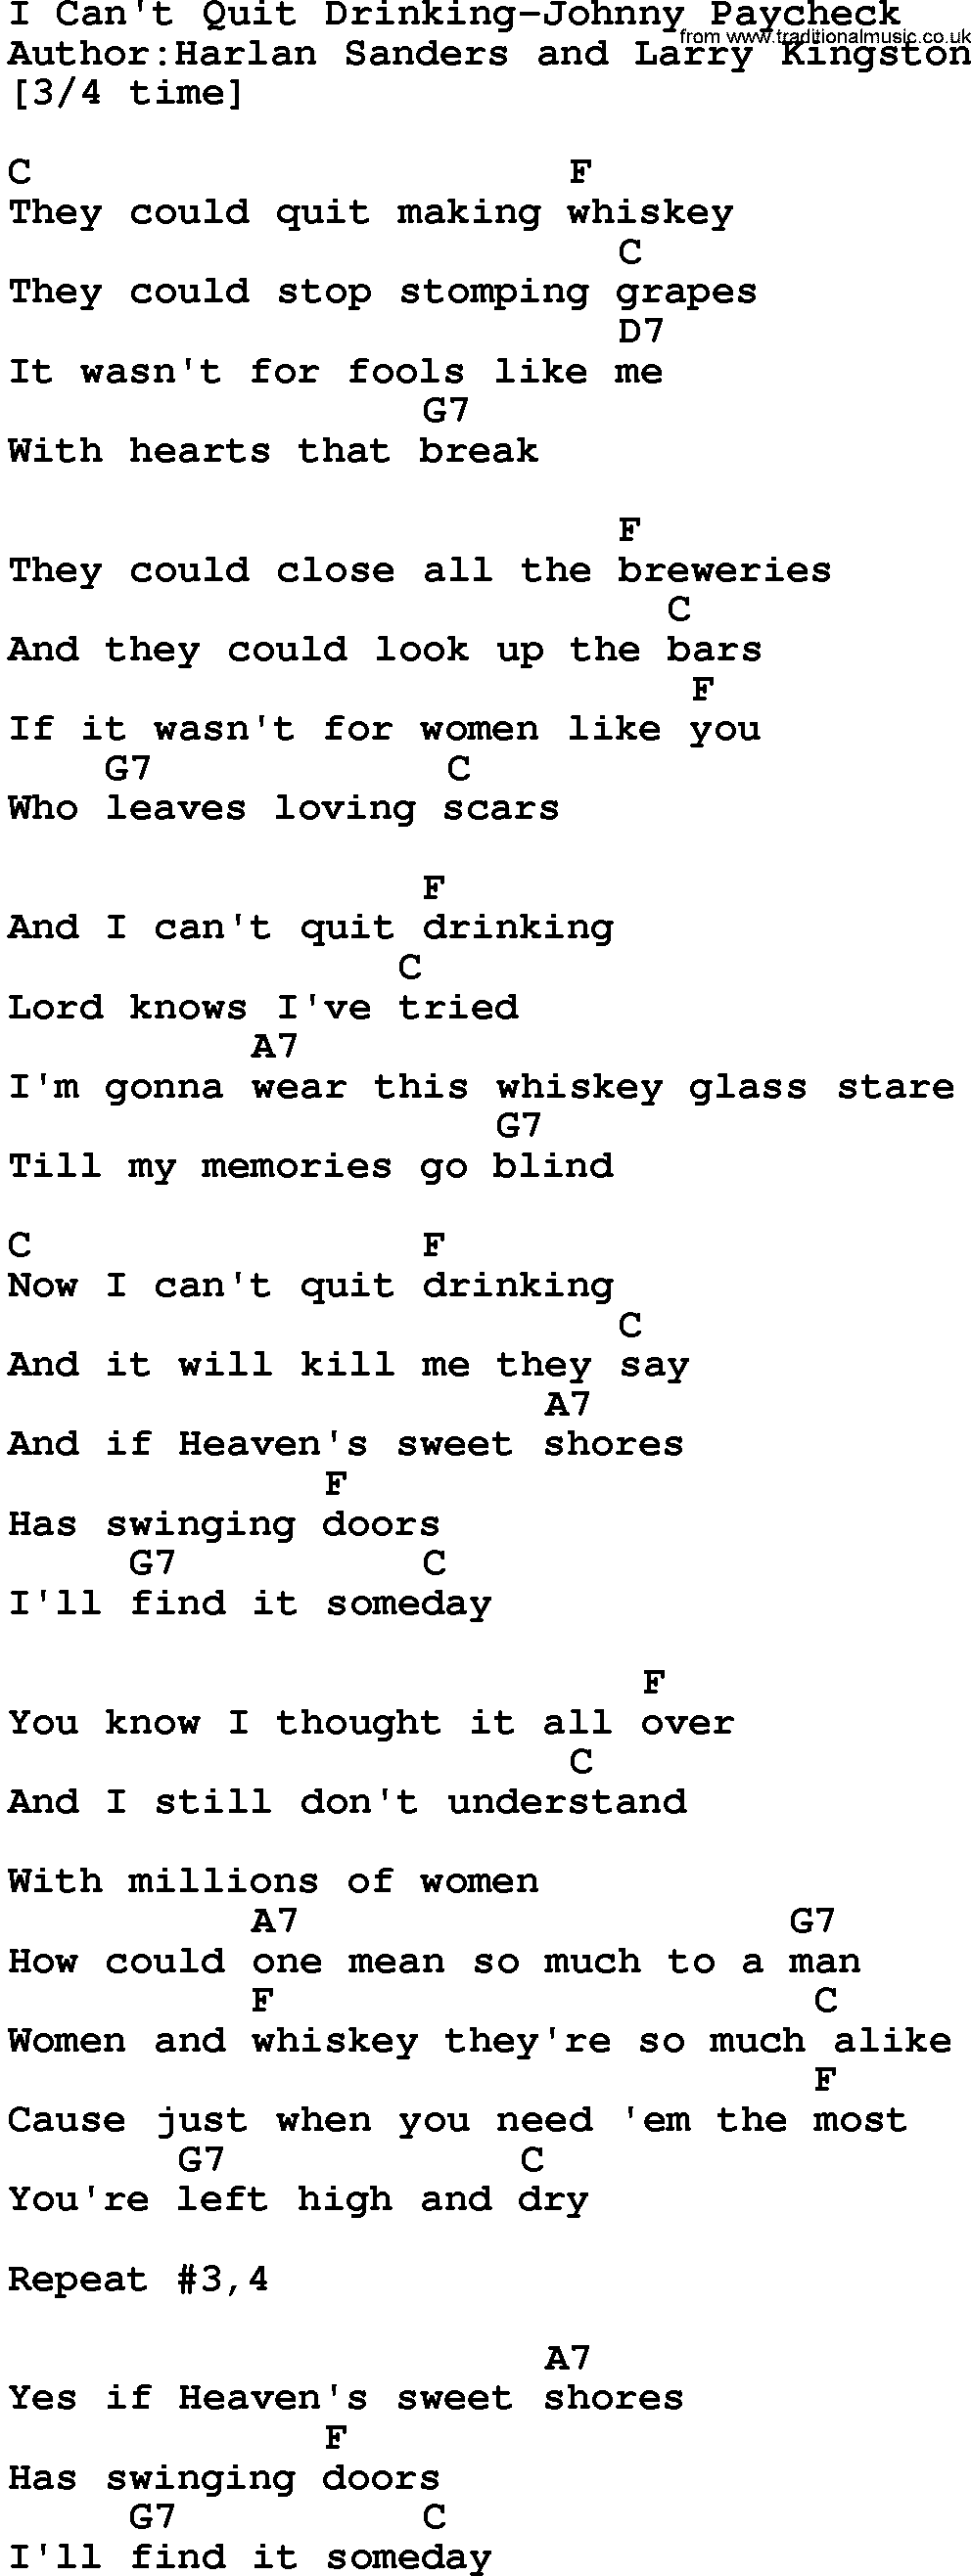 Country music song: I Can't Quit Drinking-Johnny Paycheck lyrics and chords